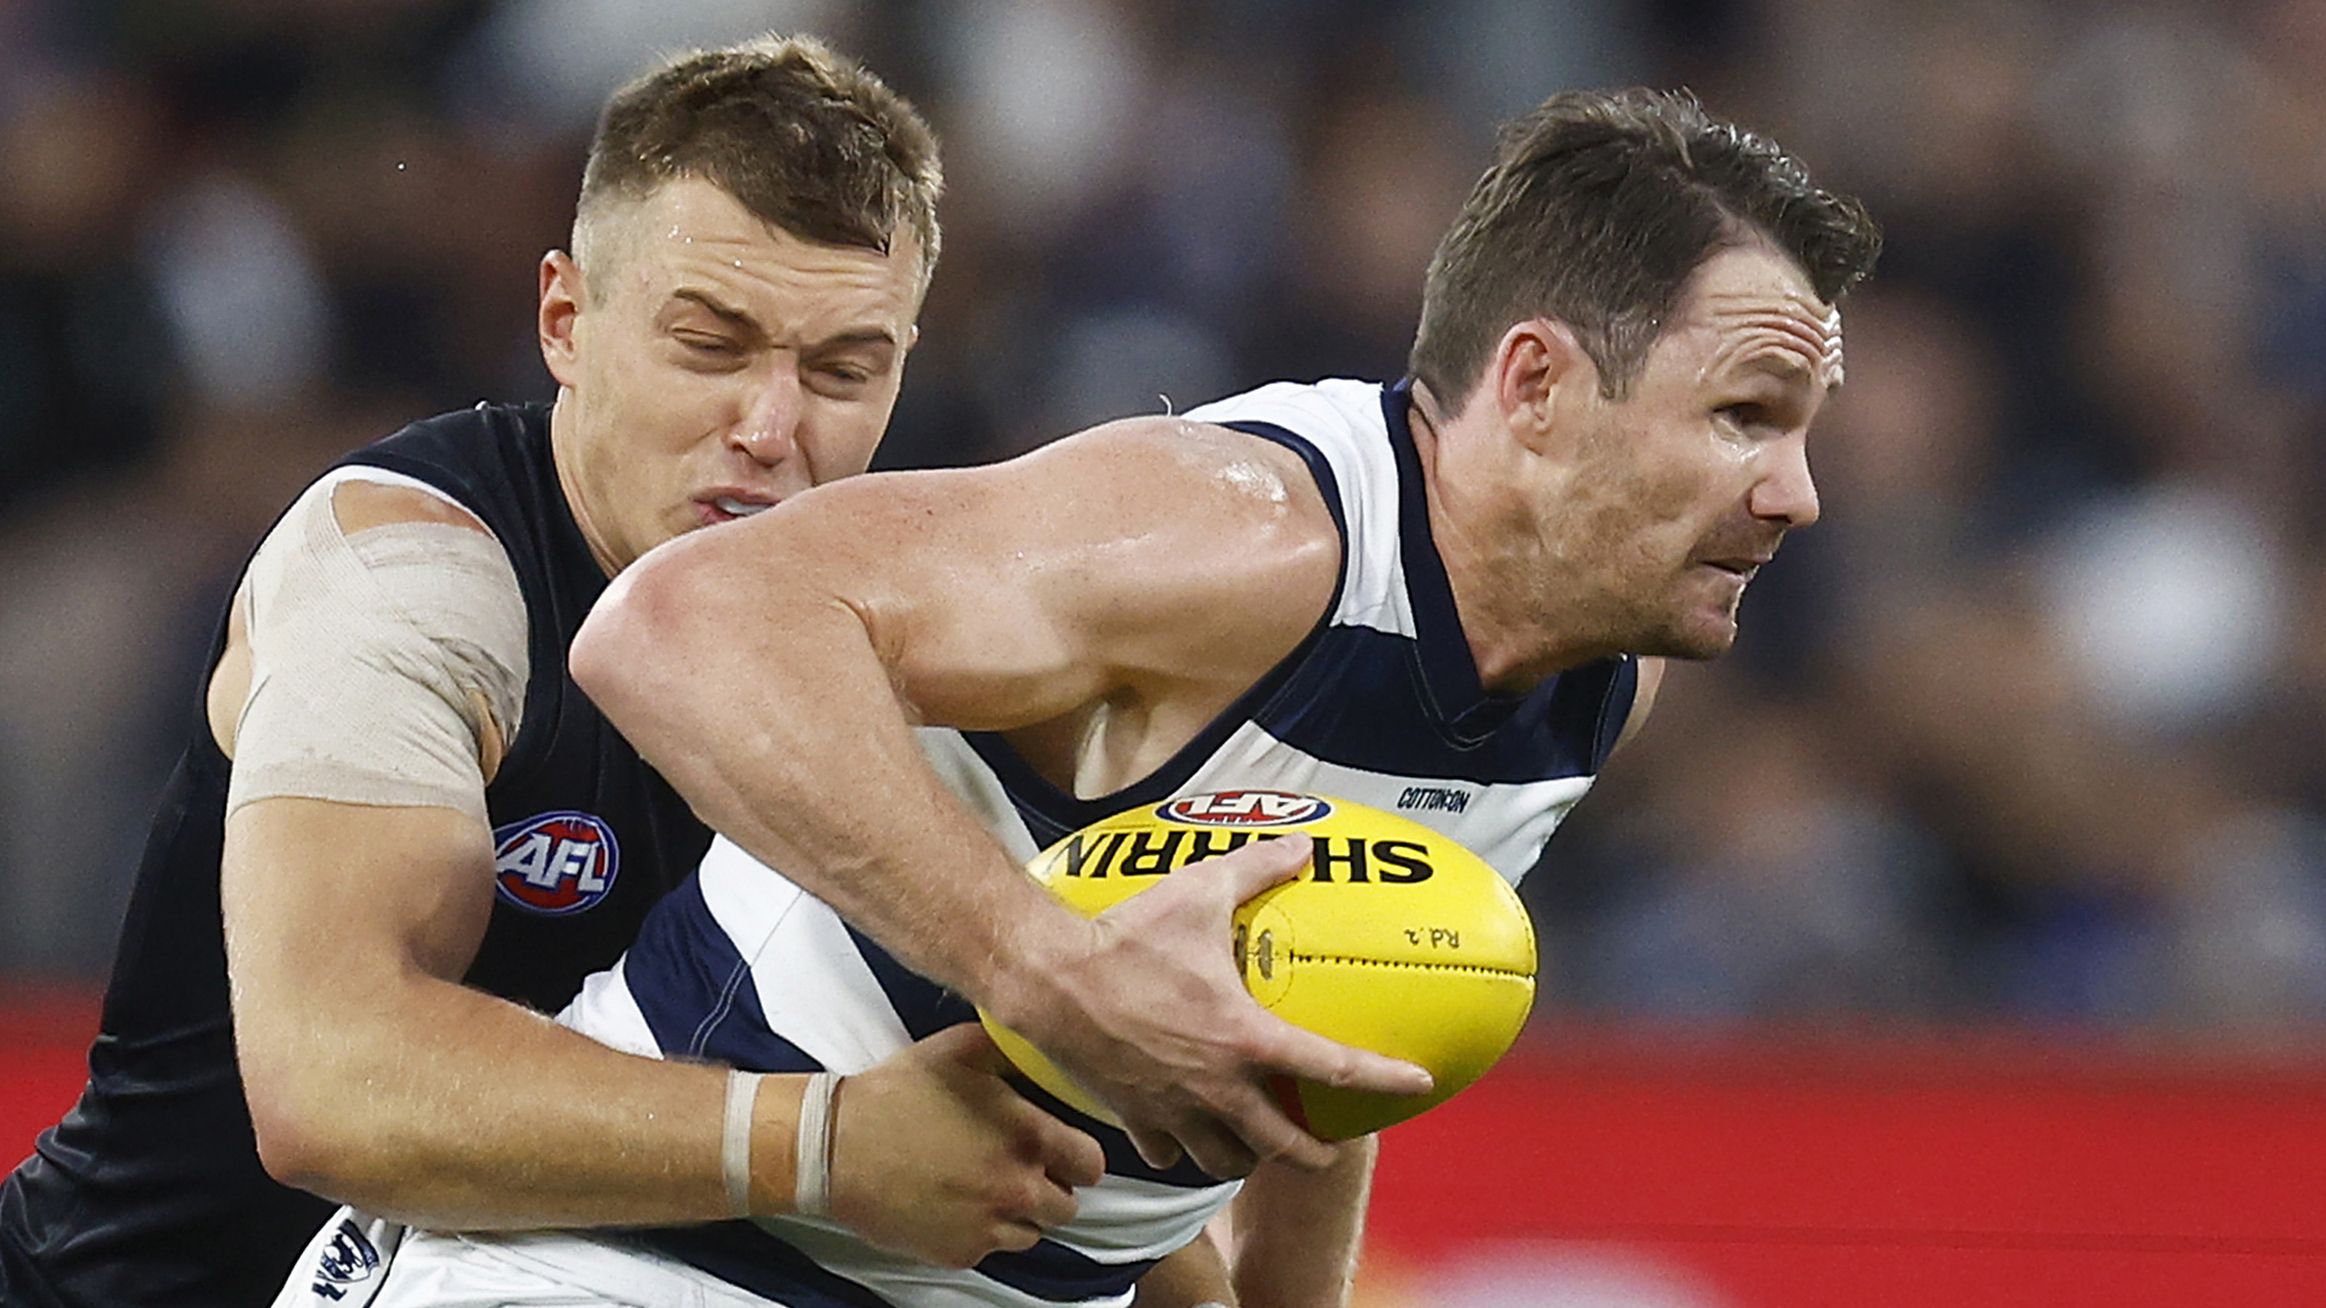 'Two shockers': Questions raised over Patrick Dangerfield's form amid Geelong's winless start